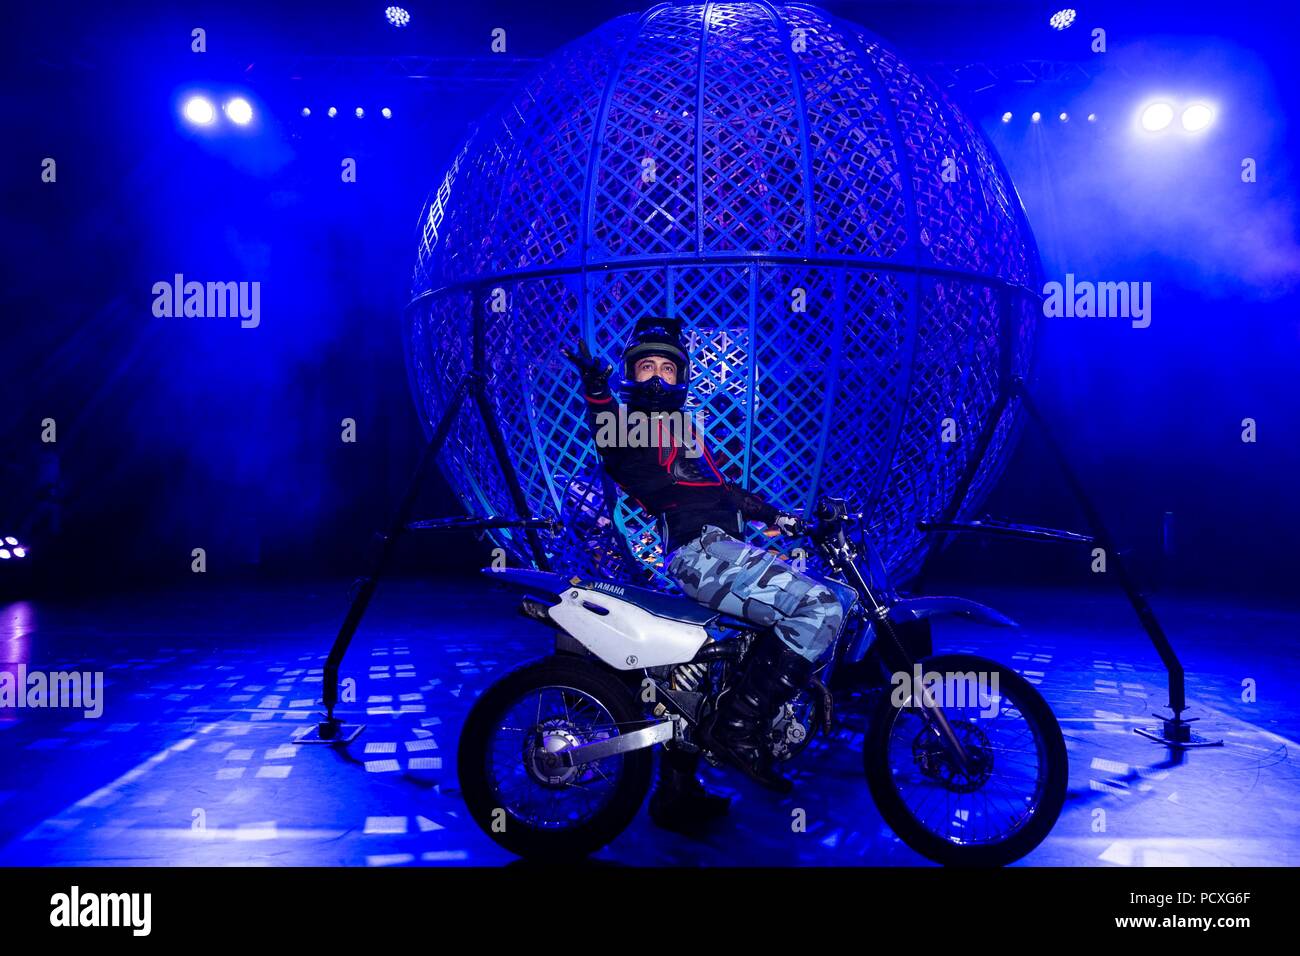 Edinburgh, UK. 4 August 2018. The Pleasance venue at the Edinburgh Fringe Festival holds its showcase of the coming festival with six acts playing at the venue. The event was hosted by comedian Kiri Pritchard McLean  Pictured: Extract from Cirque Berserk Credit: Rich Dyson/Alamy Live News Stock Photo